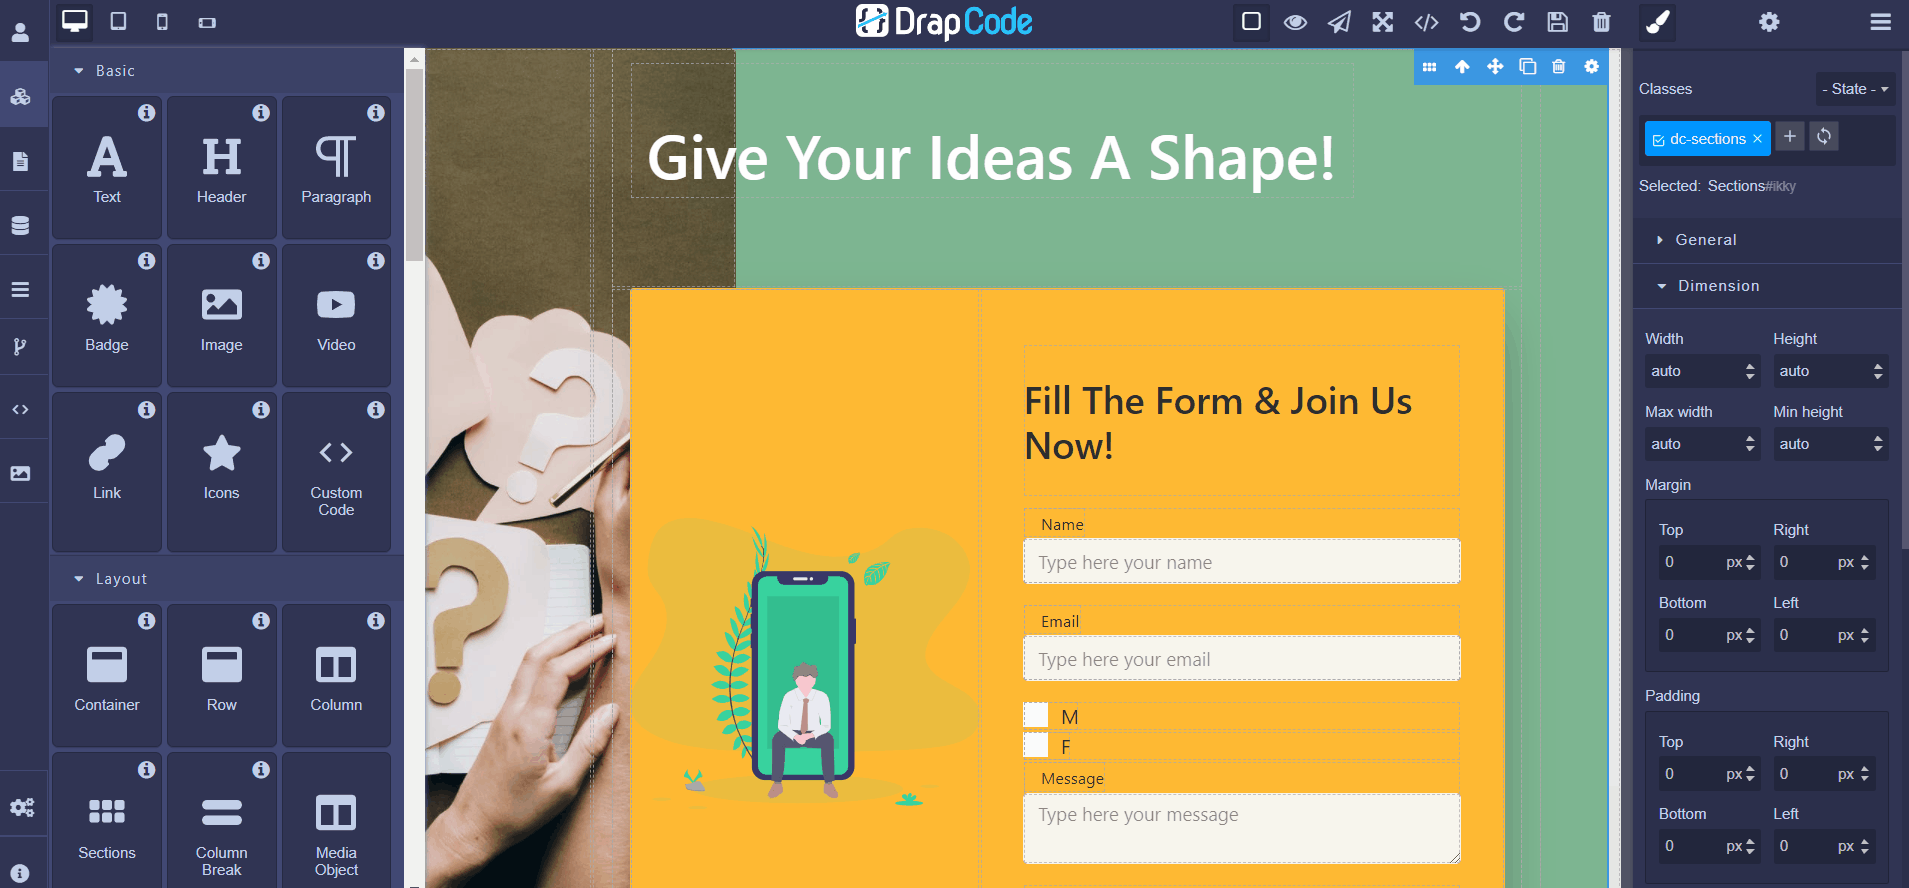 Get feedback from a vast remote working audience about DrapCode